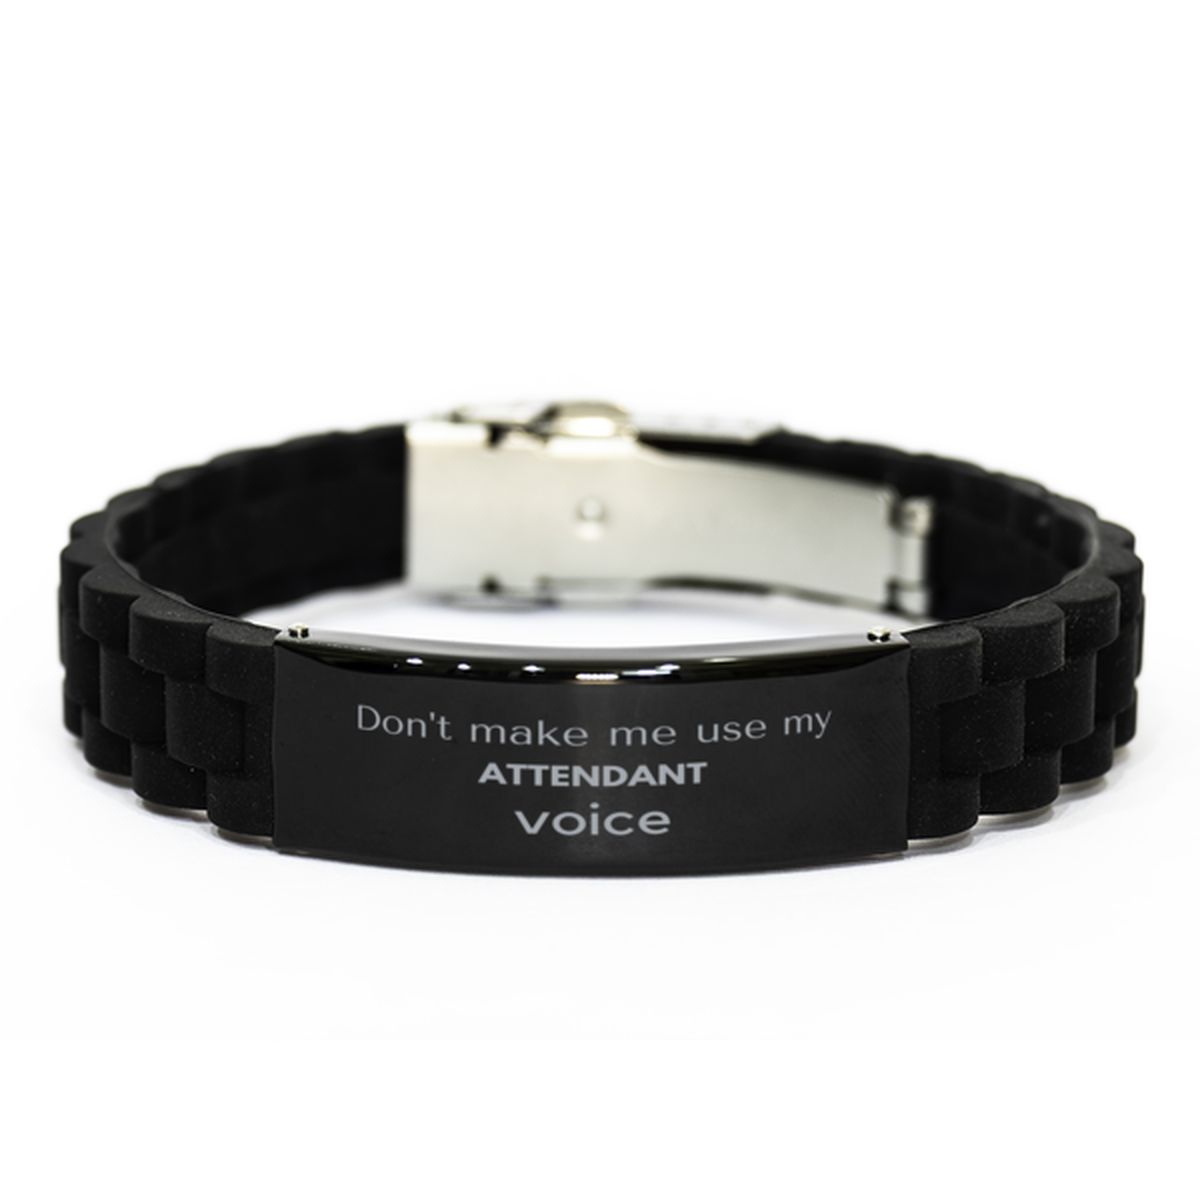 Don't make me use my Attendant voice, Sarcasm Attendant Gifts, Christmas Attendant Black Glidelock Clasp Bracelet Birthday Unique Gifts For Attendant Coworkers, Men, Women, Colleague, Friends